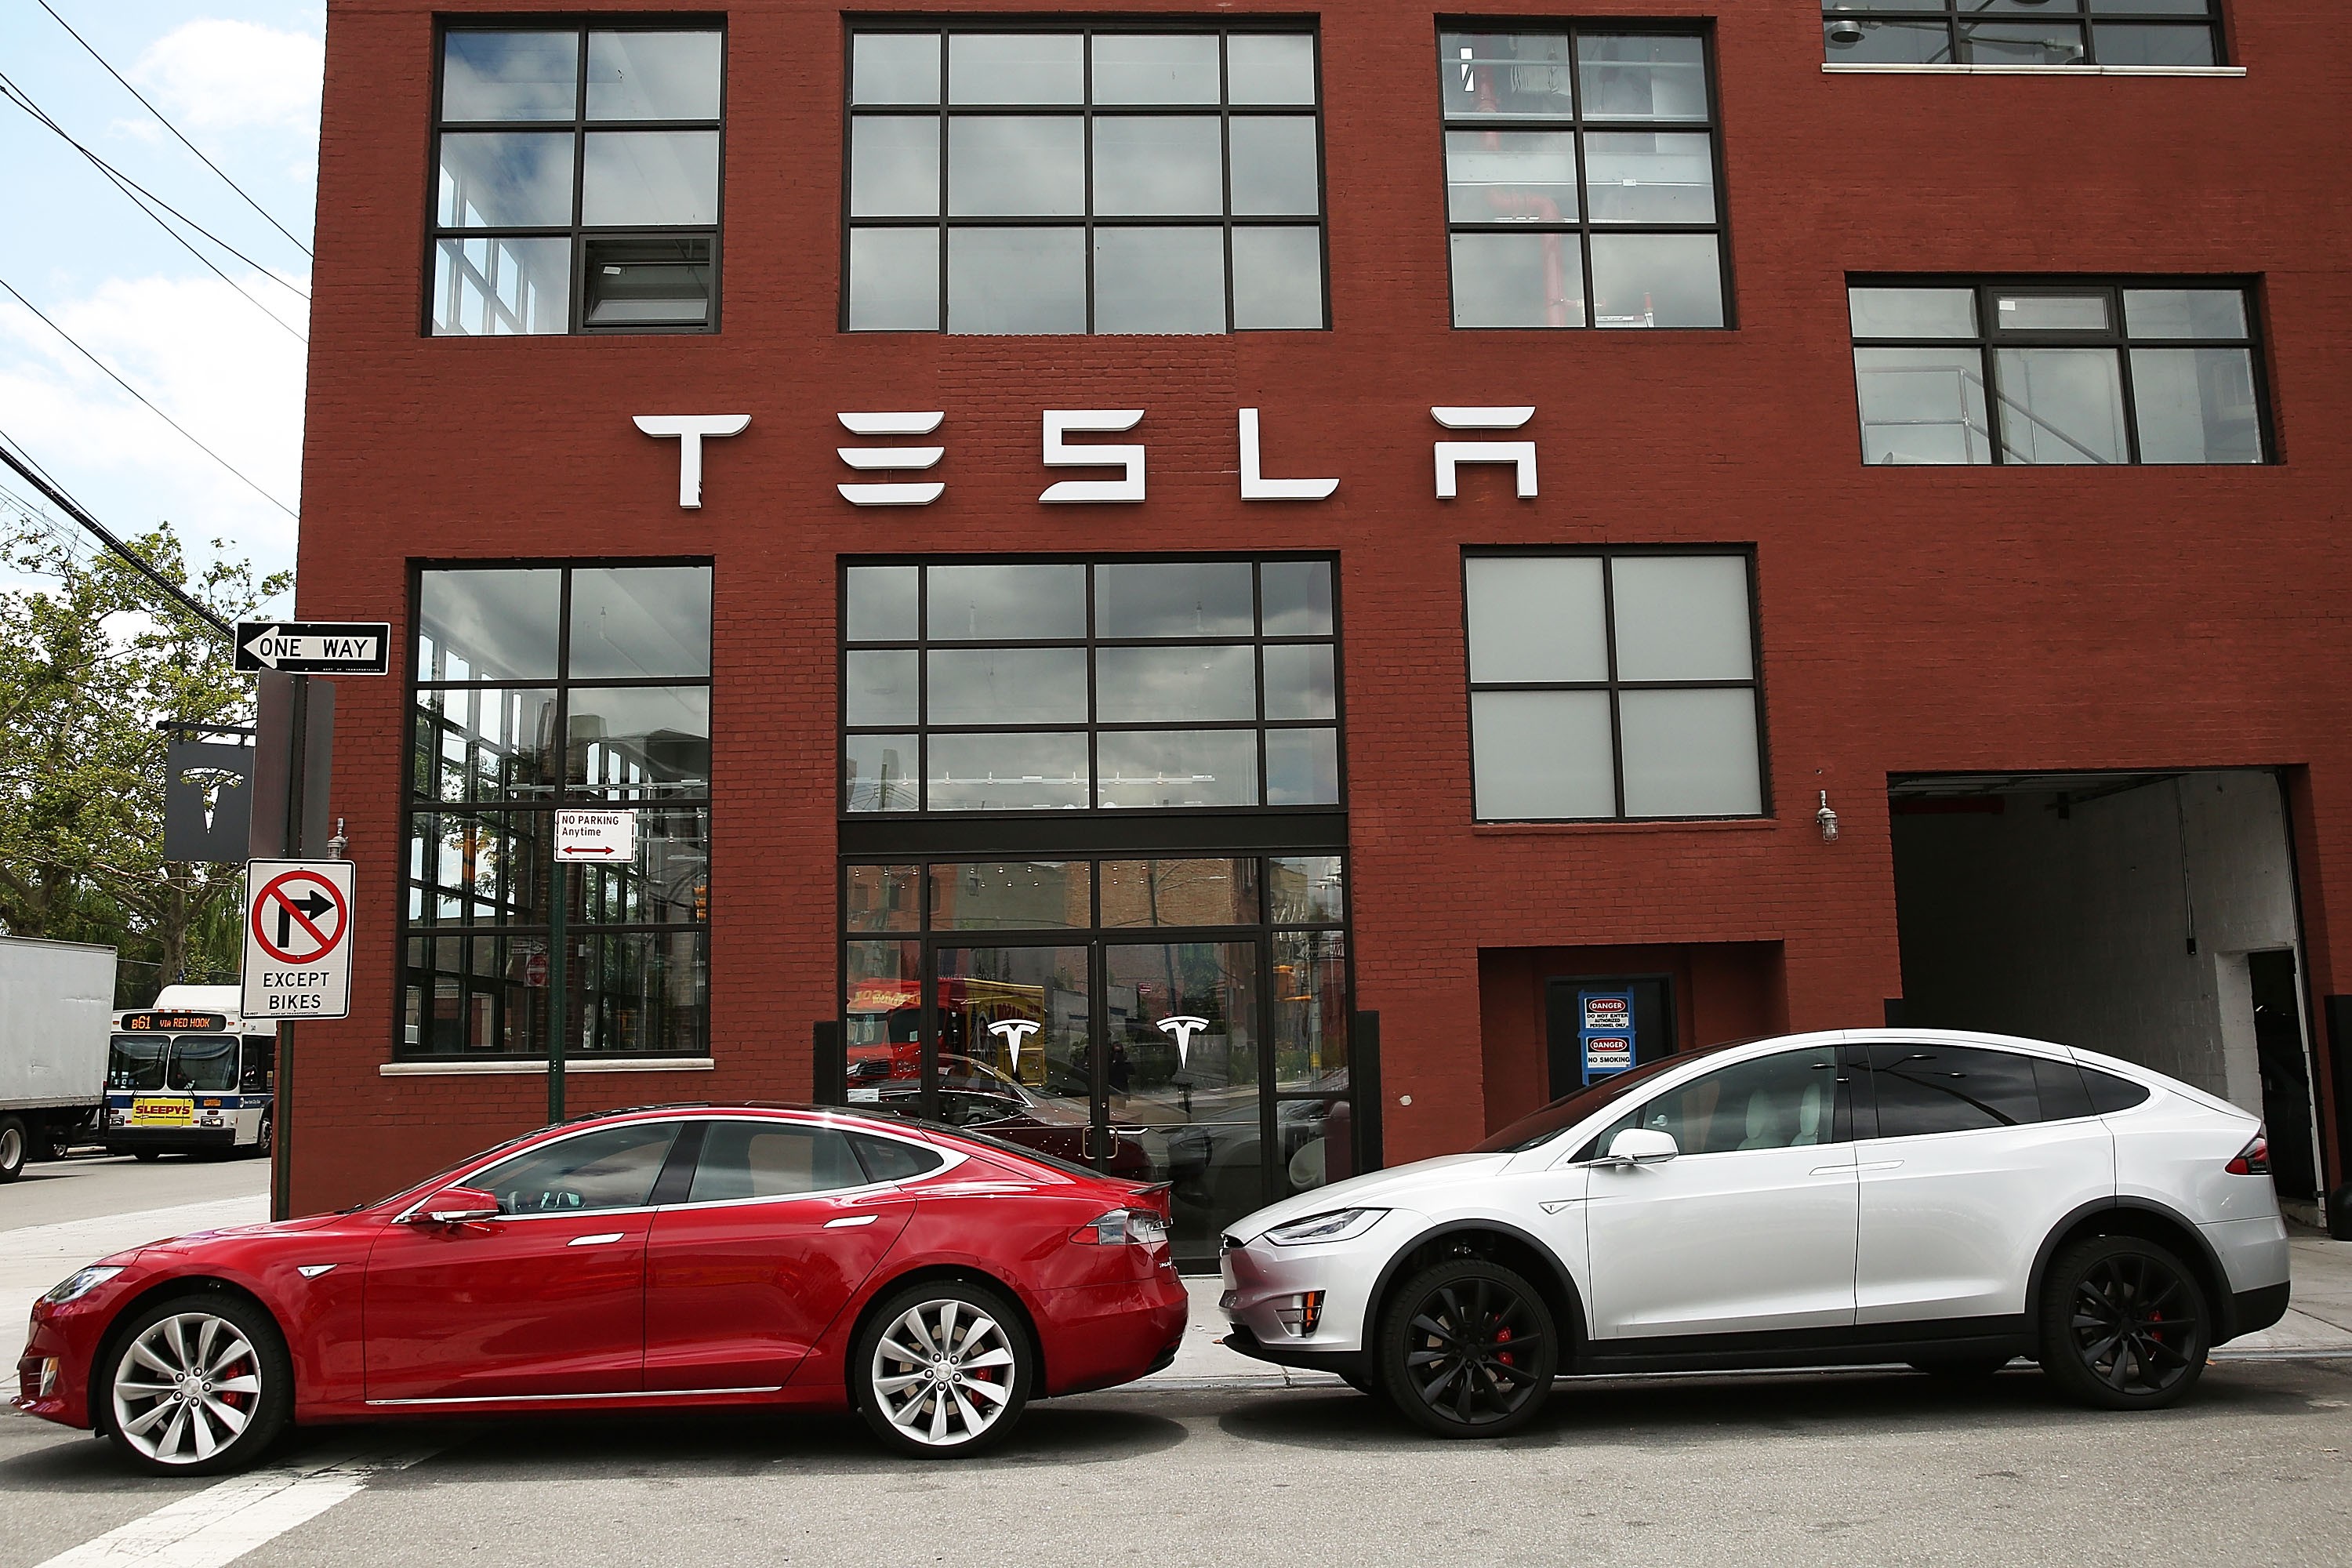 NEW YORK, NY - JULY 05: Tesla vehicles sit parked outside of a new Tesla showroom and service center in Red Hook, Brooklyn on July 5, 2016 in New York City. The electric car company and its CEO and founder Elon Musk have come under increasing scrutiny following a crash of one of its electric cars while using the controversial autopilot service. Joshua Brown crashed and died in Florida on May 7 in a Tesla car that was operating on autopilot, which means that Brown's hands were not on the steering wheel. Spencer Platt/Getty Images/AFP